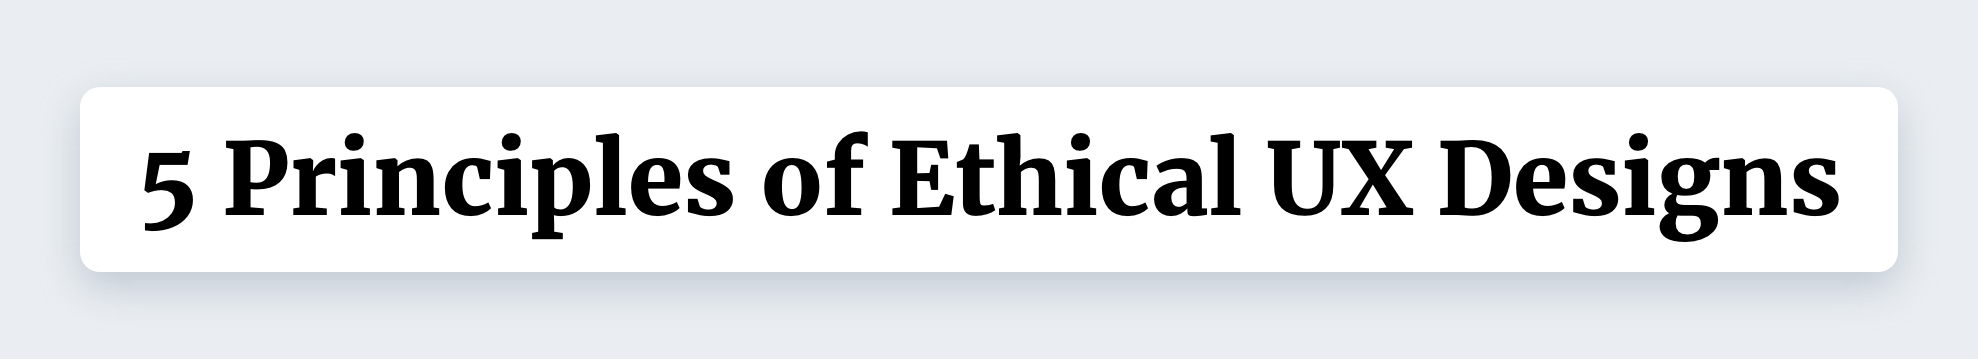 5 Principles of Ethical UX Designs